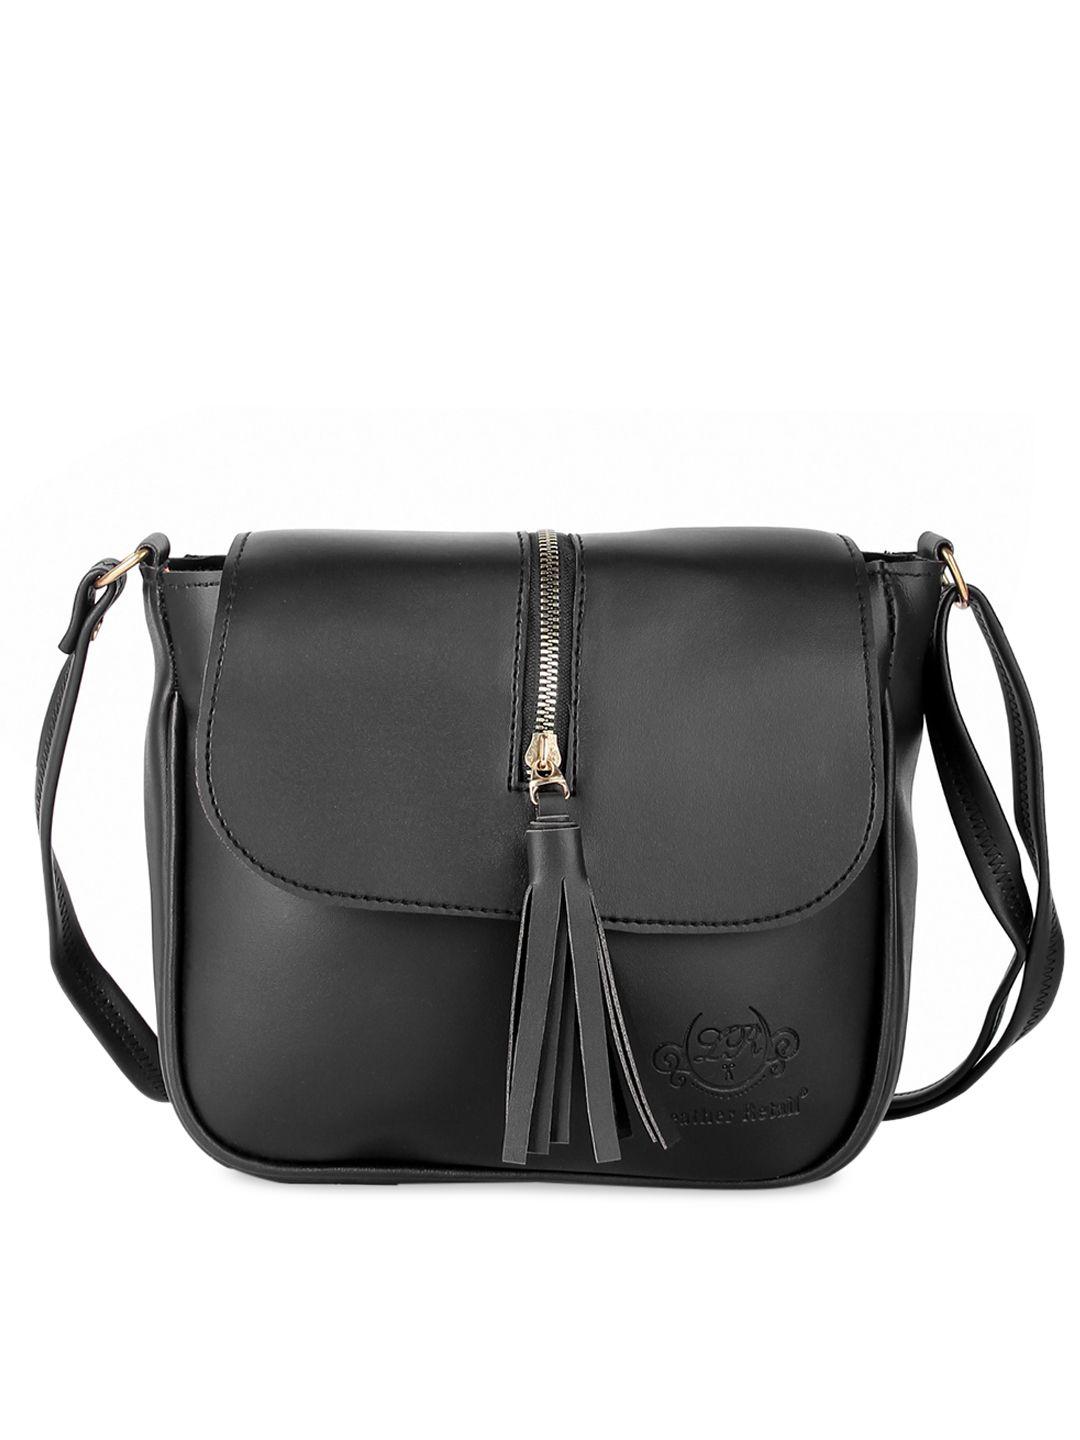 leather retail black pu structured sling bag